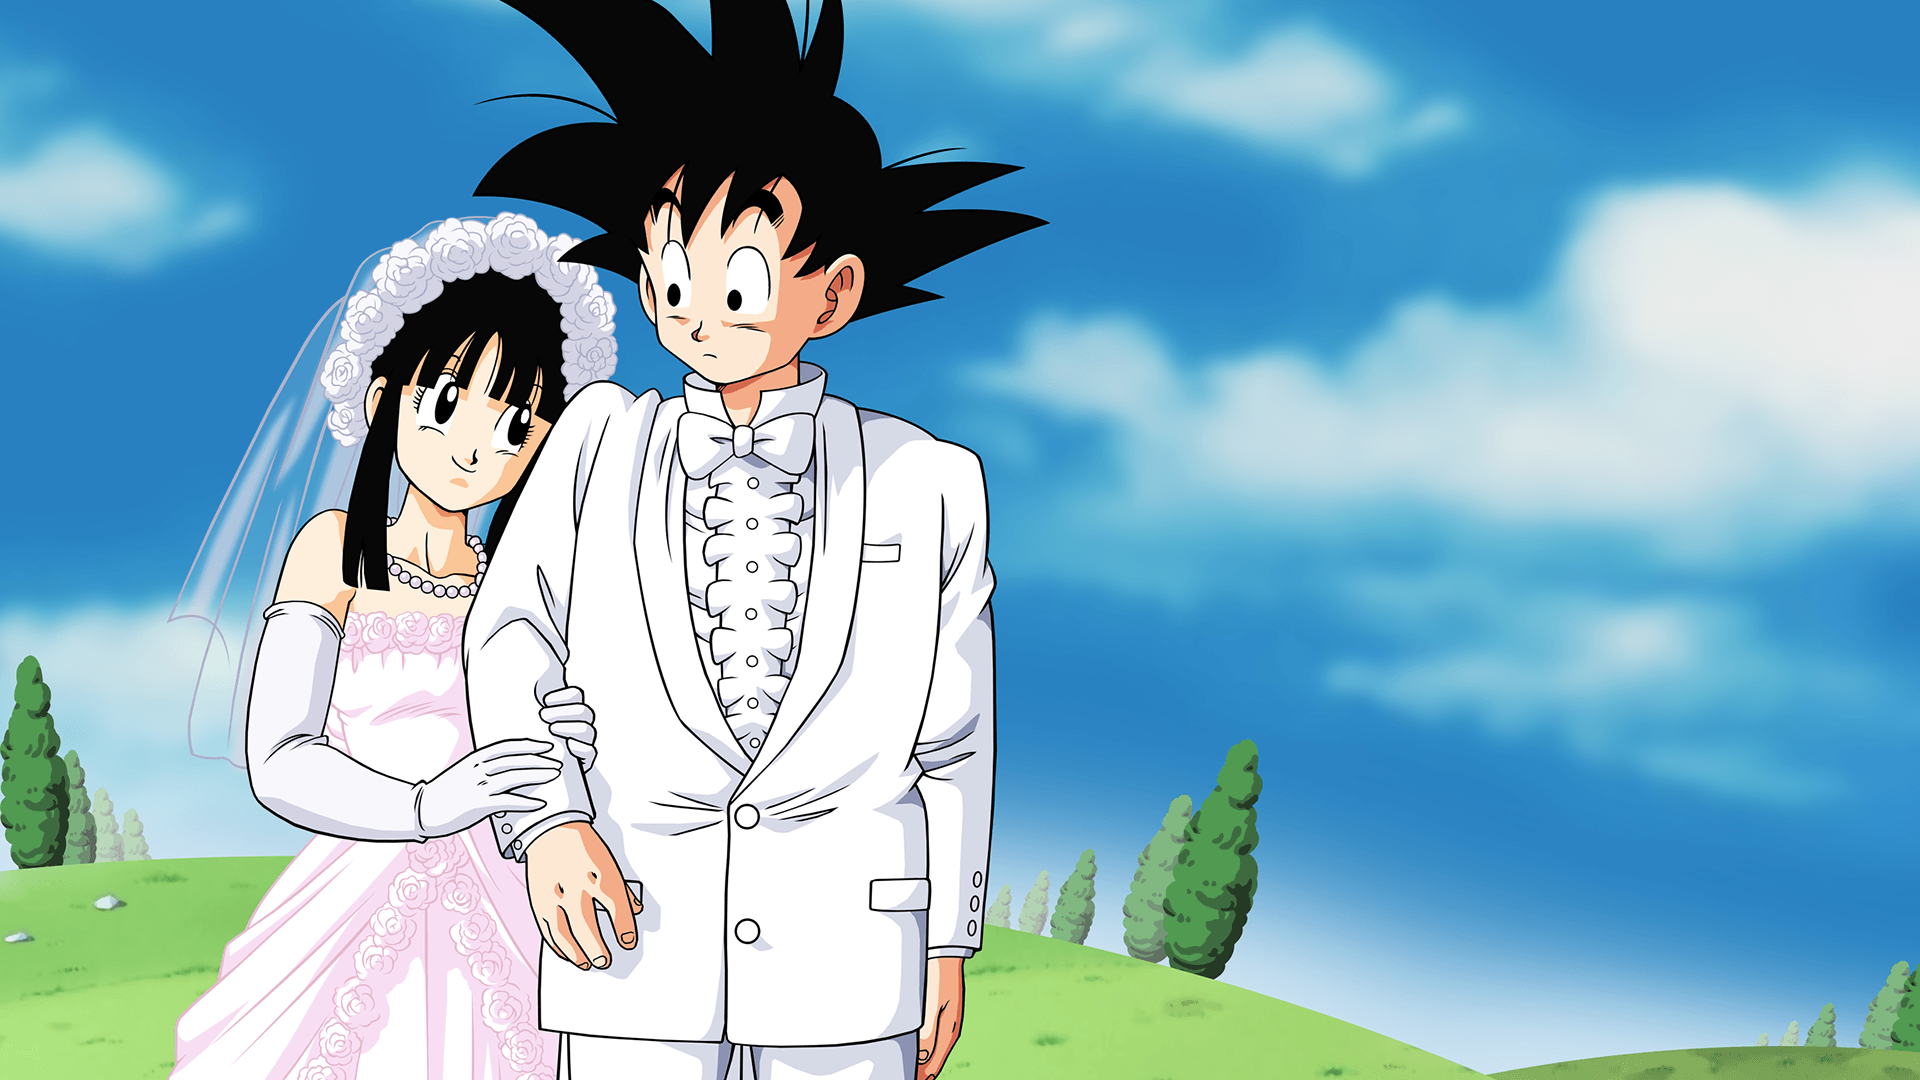 Goku And Chi Chi Marriage Computer Wallpaper, Desktop Background